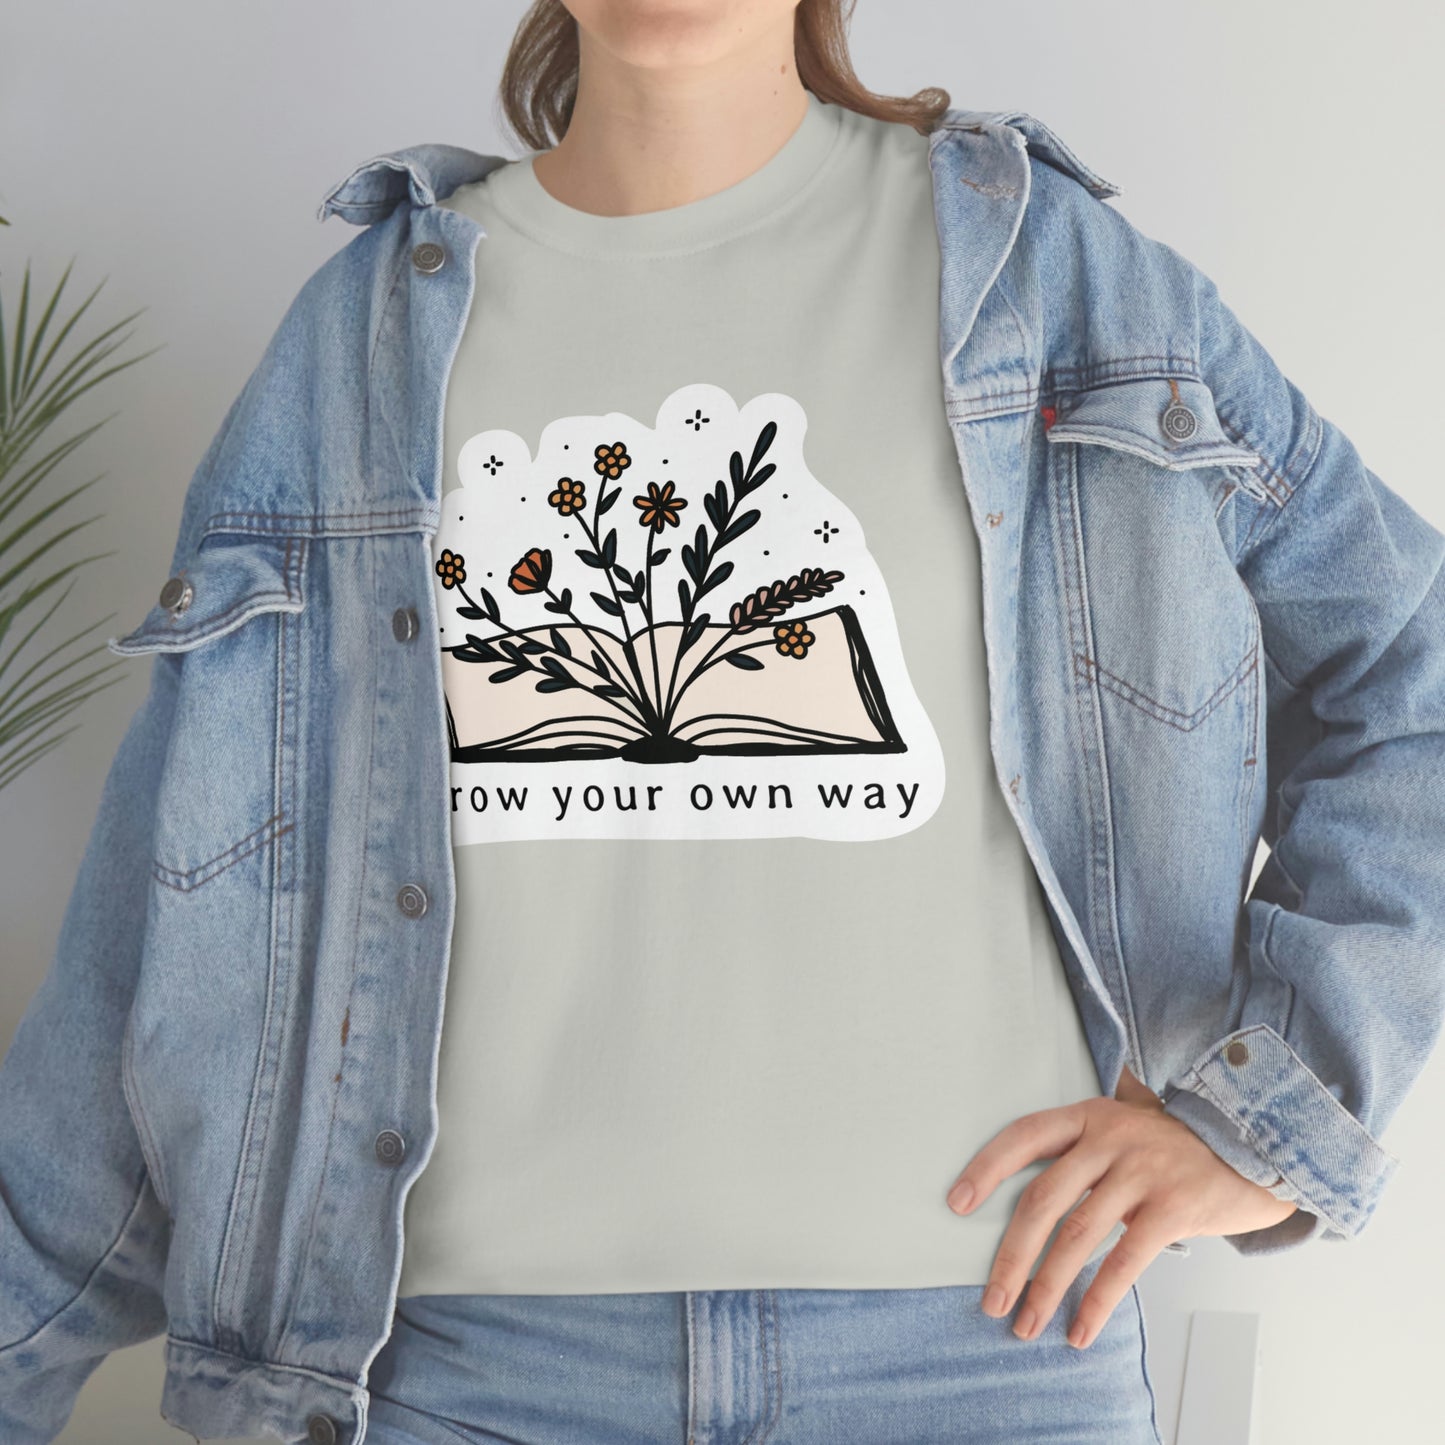 Grow your own way Cotton Tee